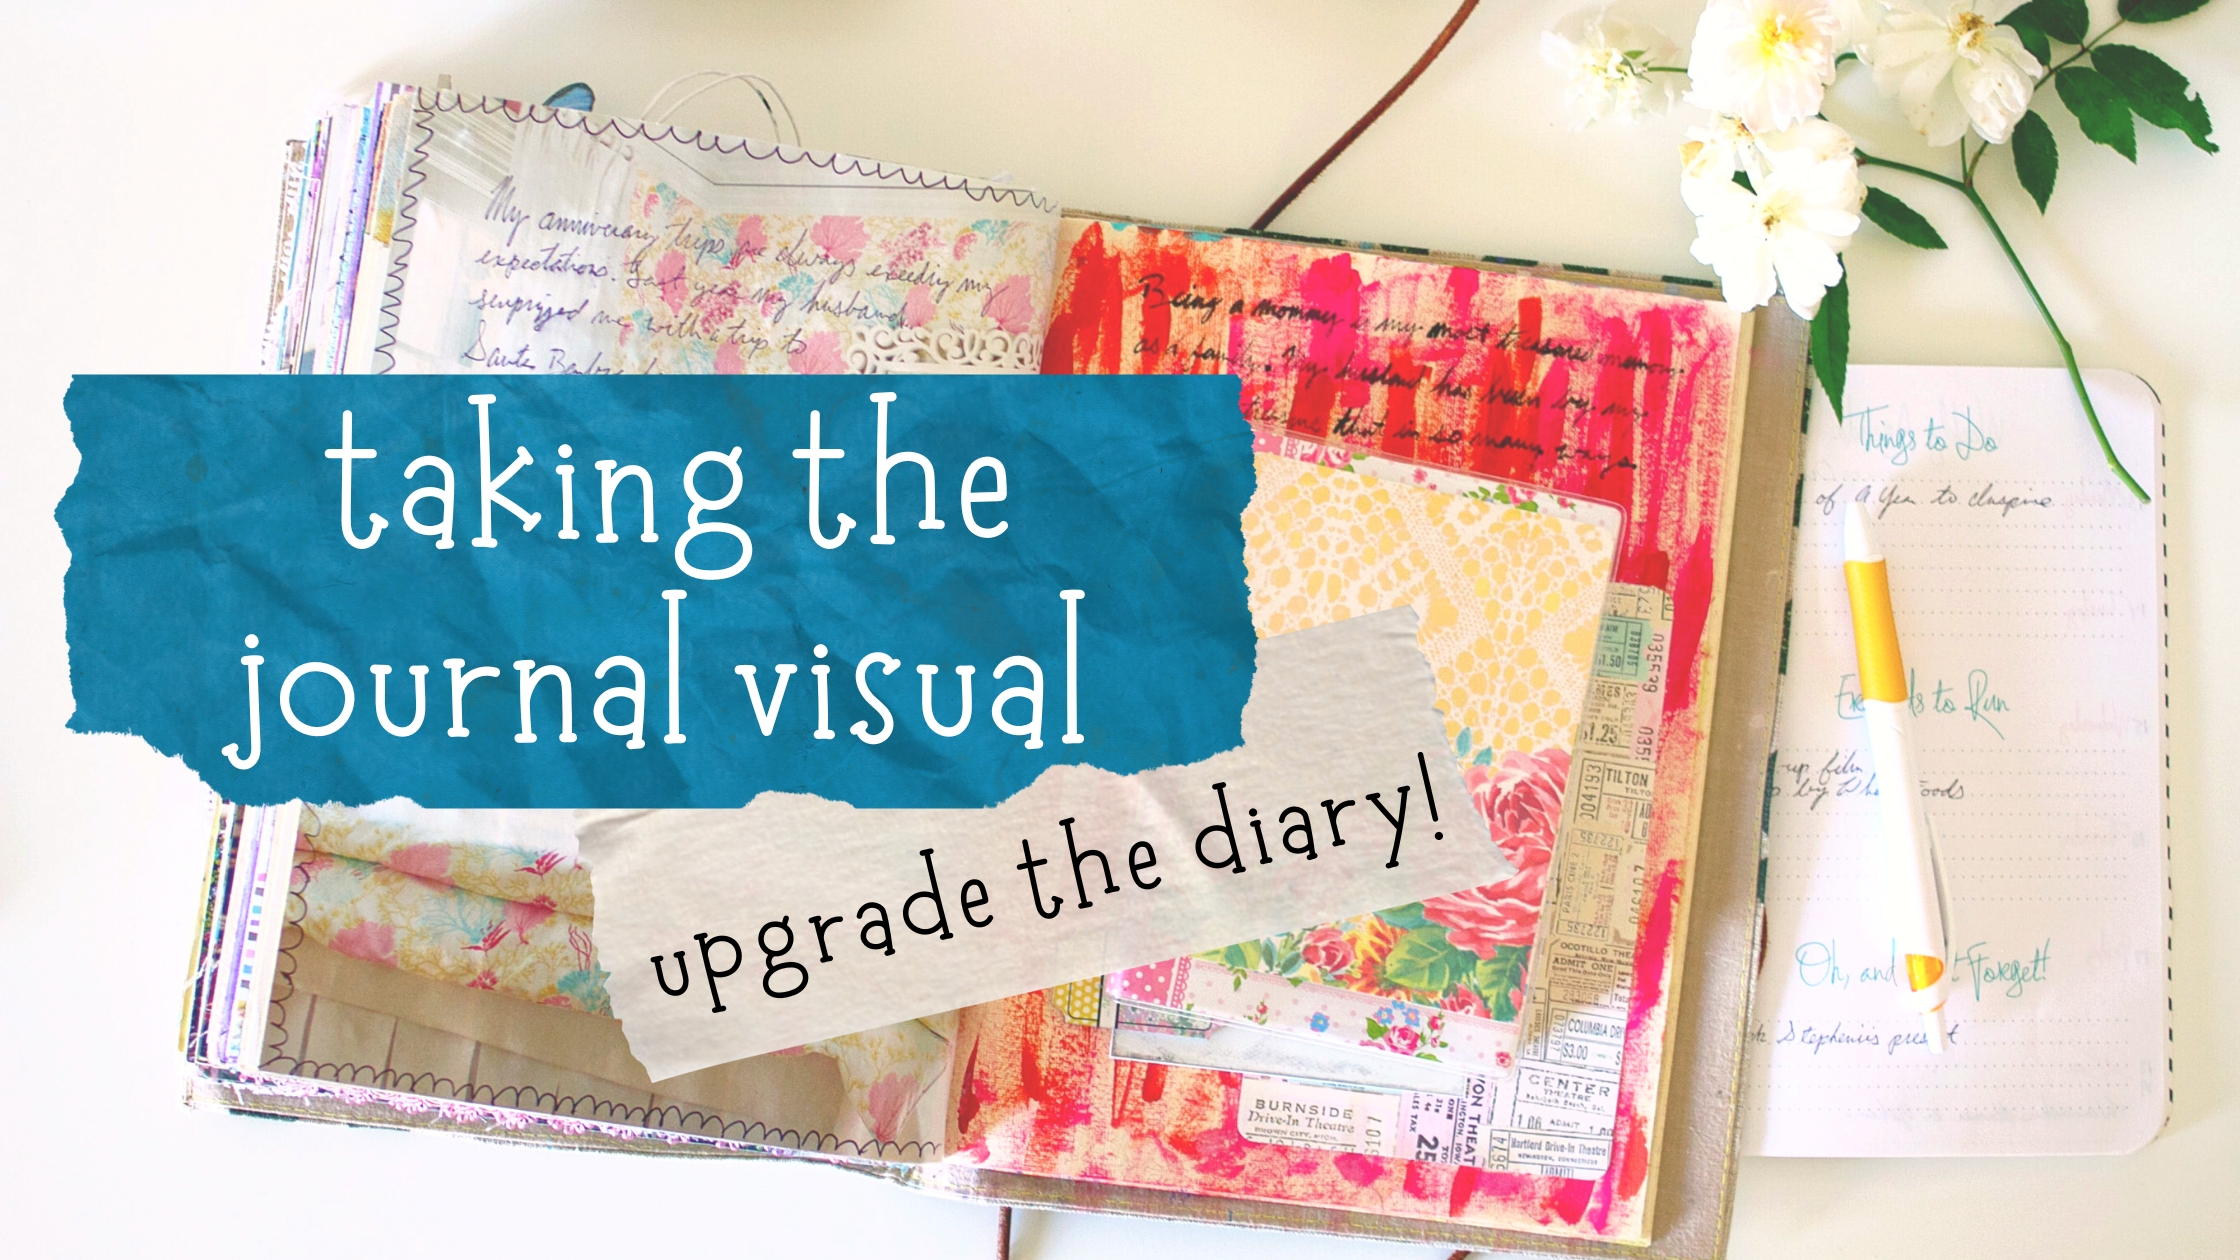 The Journal, Visual journal, how to visual journal, visual journaling,